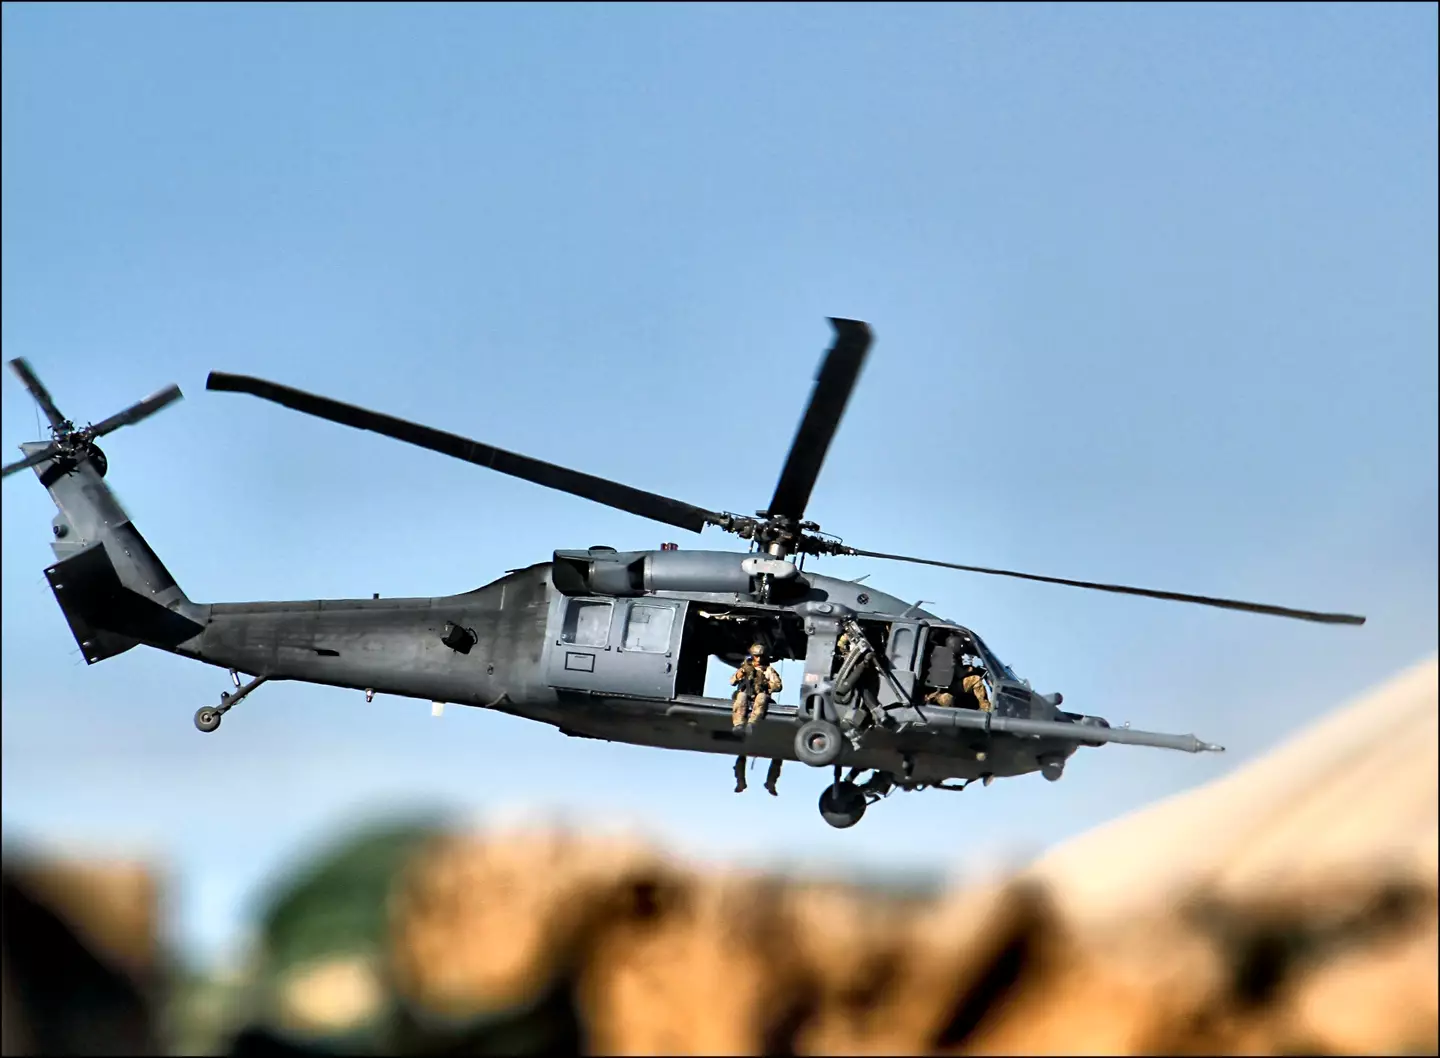 A Black Hawk helicopter.